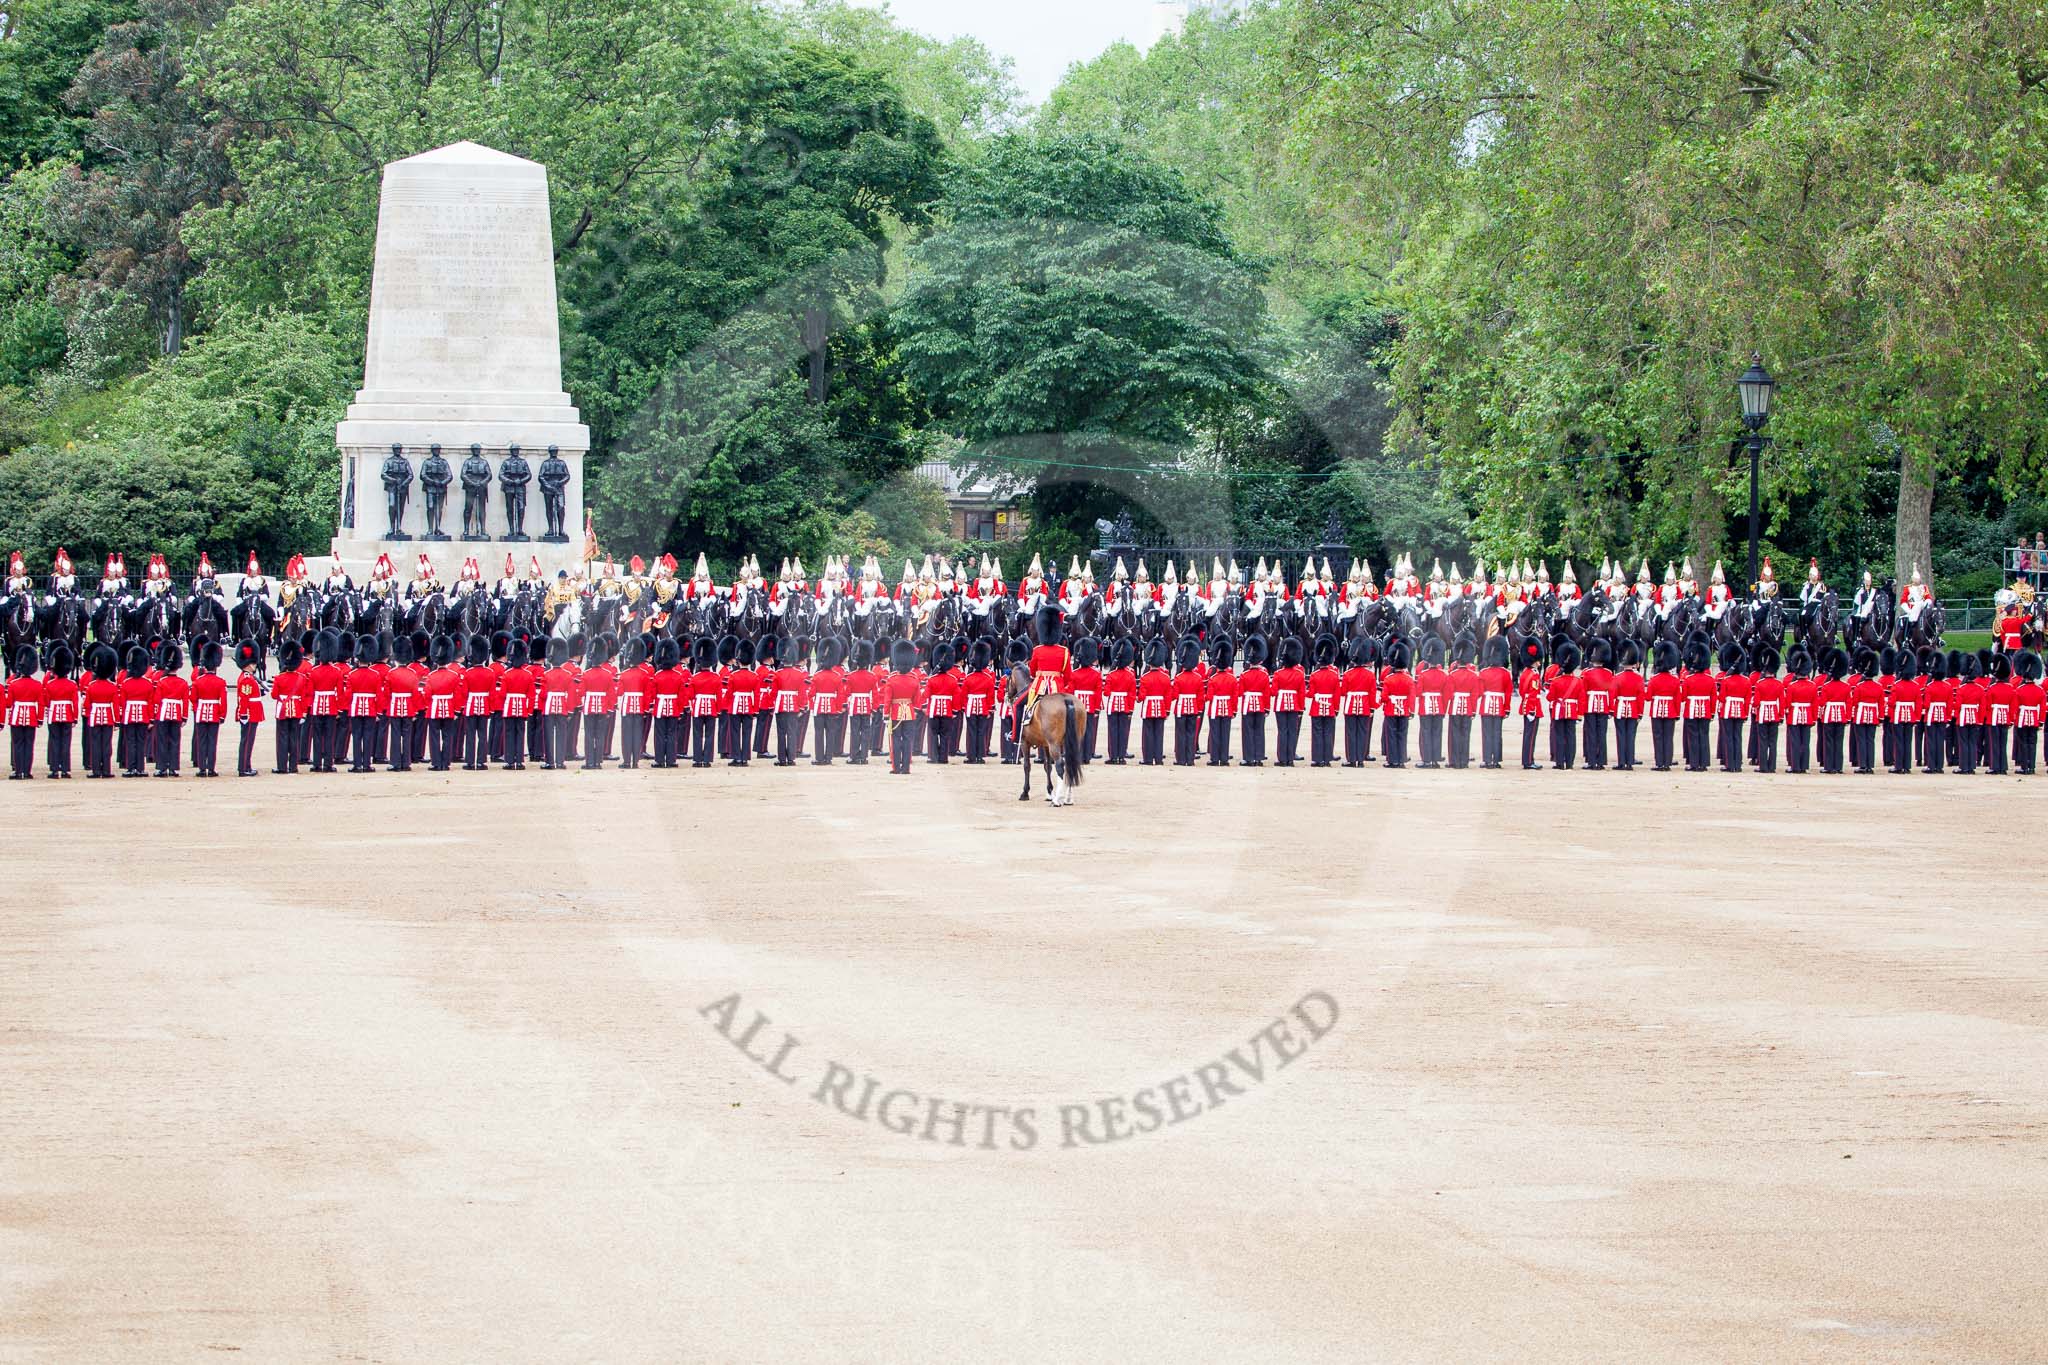 Trooping the Colour 2012: All the guardsmen are now facing the Northern,, St. James's Park side of Horse Guards Parade, in the process of forming divisions..
Horse Guards Parade, Westminster,
London SW1,

United Kingdom,
on 16 June 2012 at 11:30, image #366